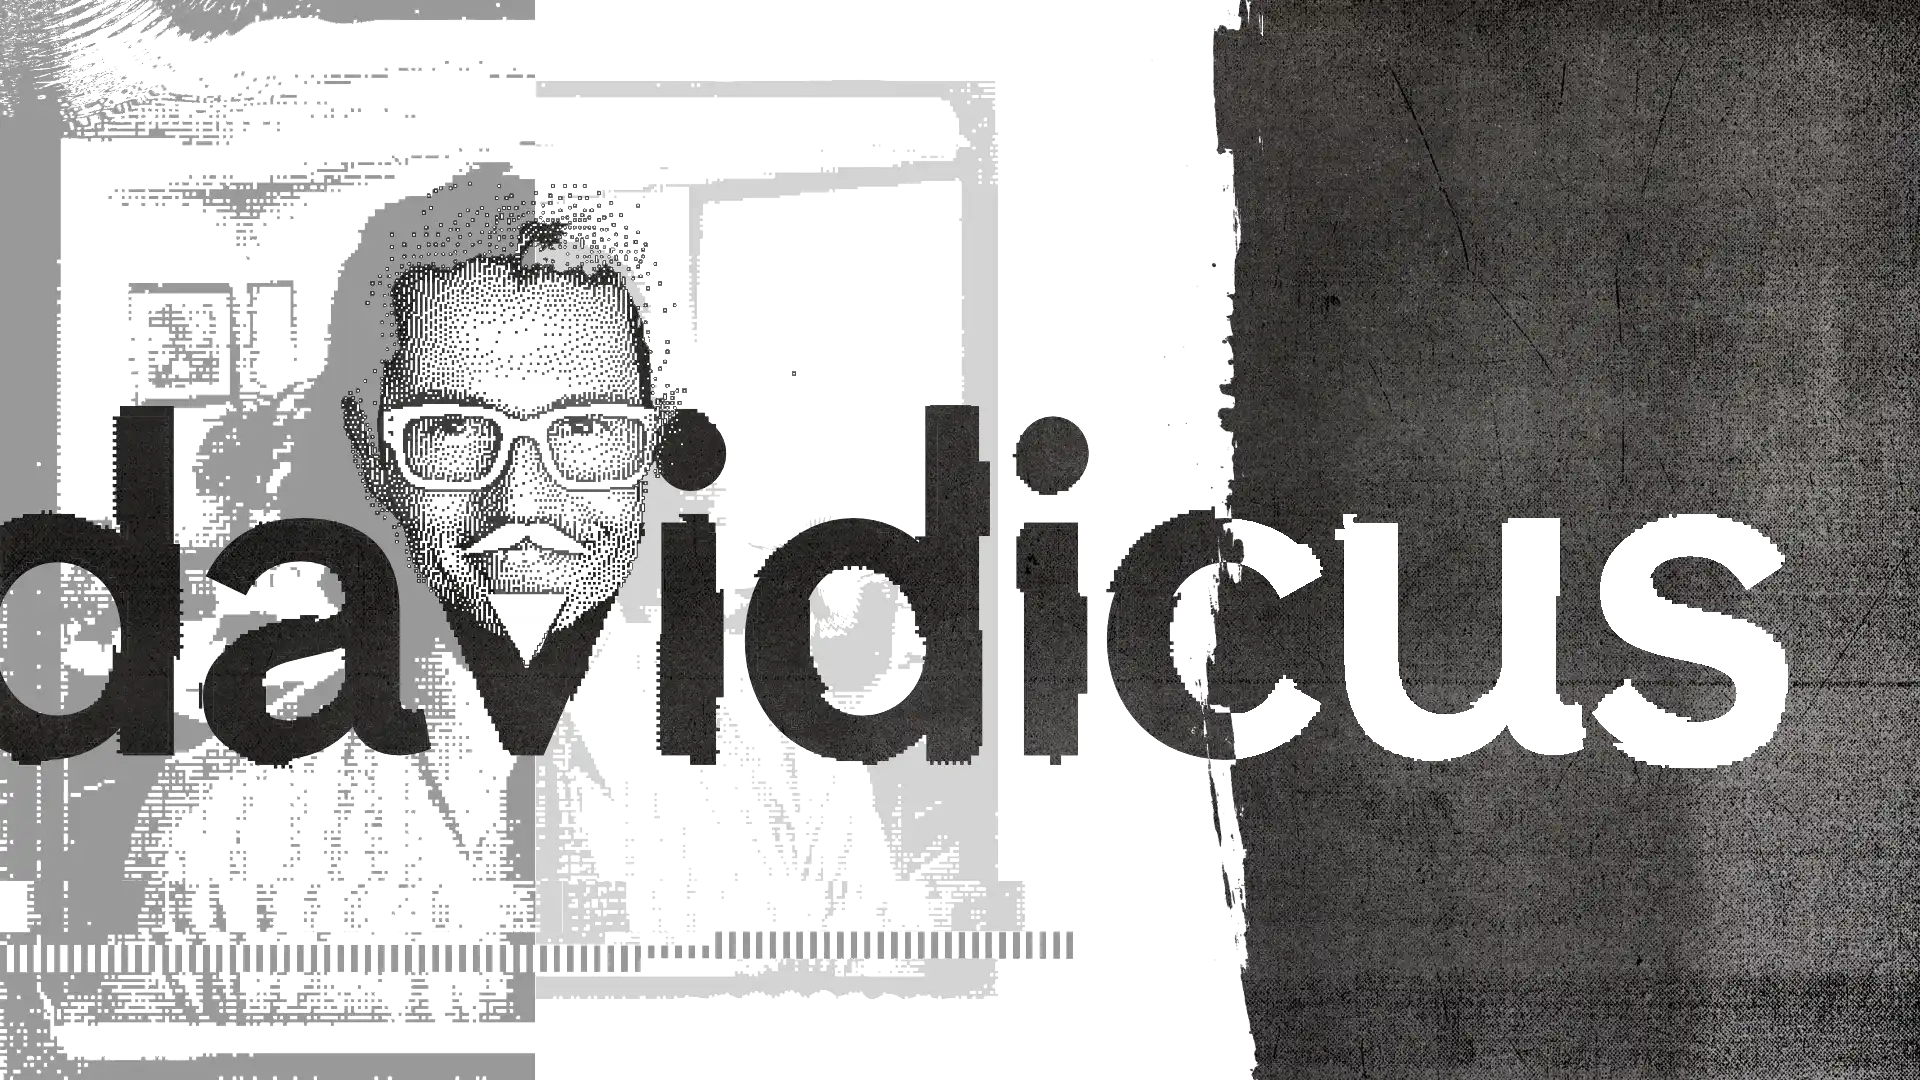 large davidicus logo with retro dithered image of his face, with beard in the V